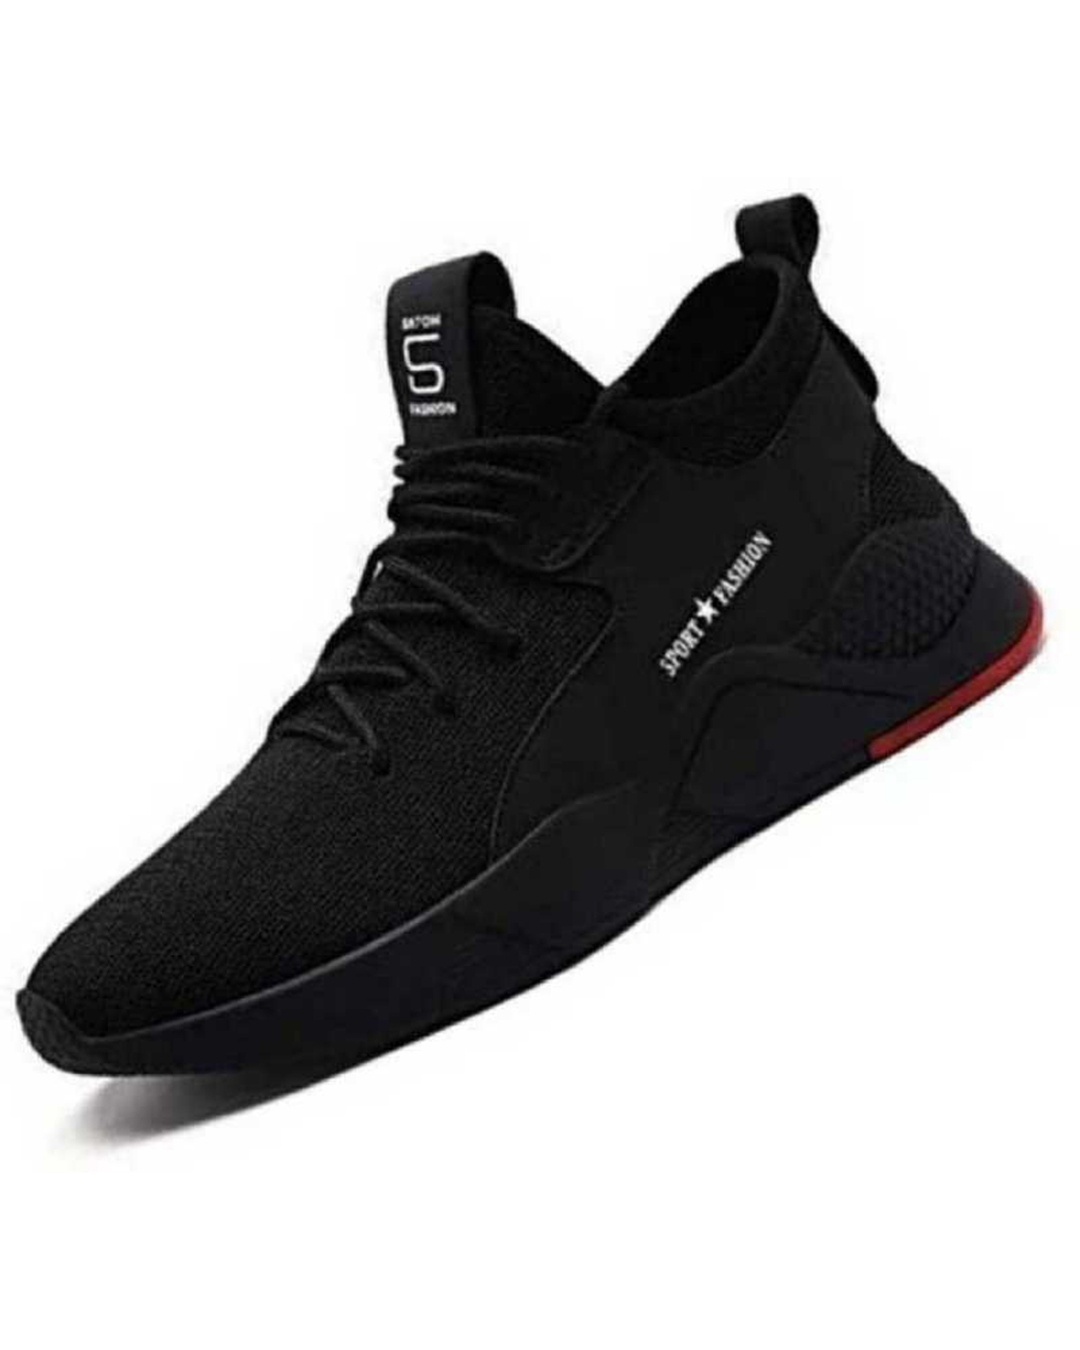 Black Running Shoes | Sports Direct